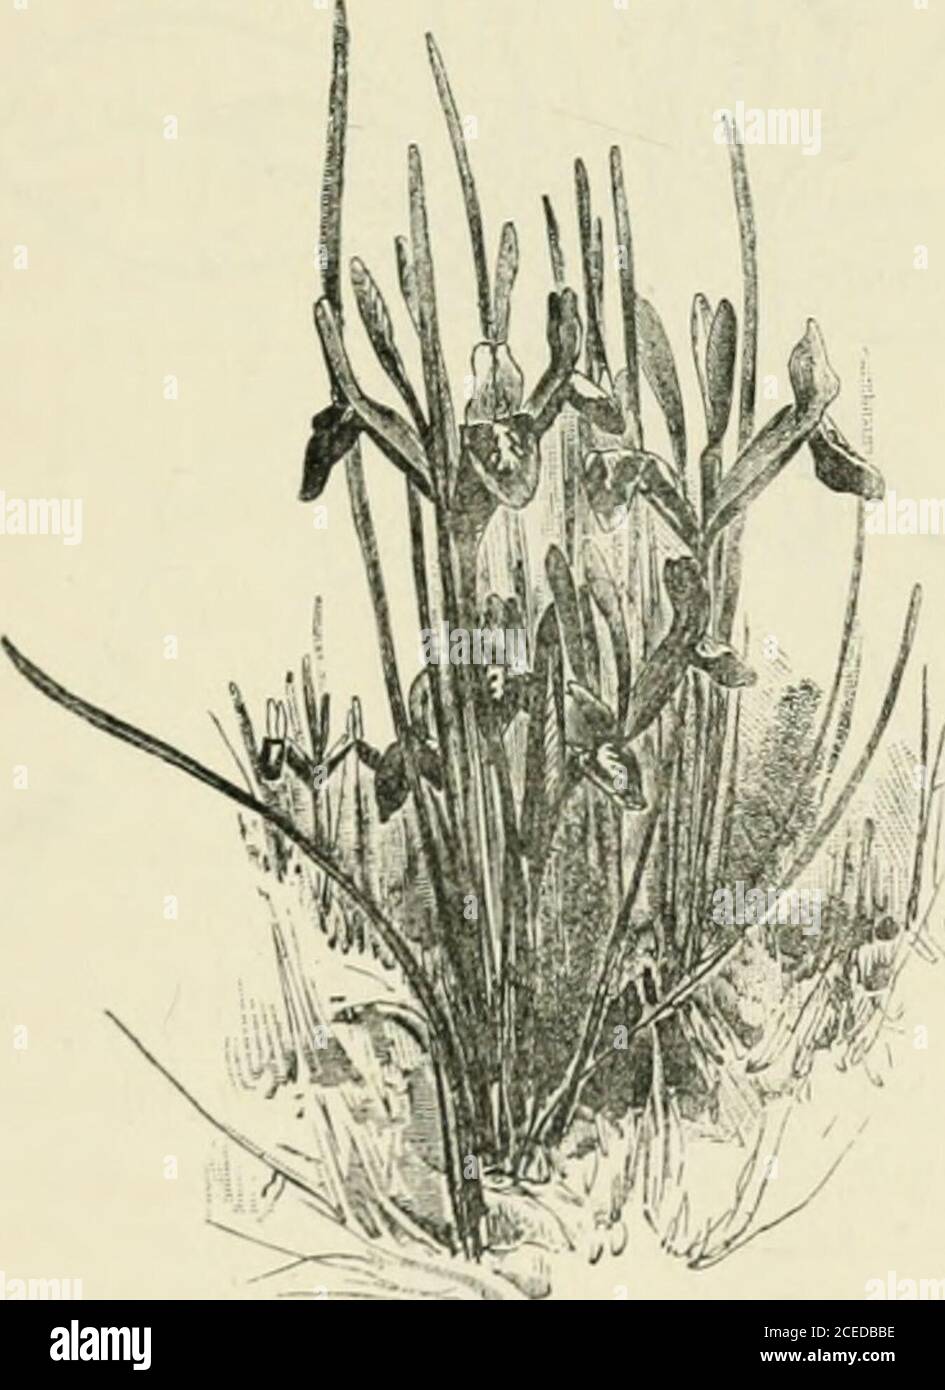 . Bulbous irises. Fig. 2.—Iris Sisykinchium. of the characters of the bulbous Irises of long ago. Andwe may fairly suppose that from it has descended the morespecialised form now so well known as I. reticulata (fig. 3).This receives its name from the netted nature of the coats of thebulb* (figs. 4 and 5). I. Sisyrinchium has also netted coats,but the coats of I. reticulata are fewer and thinner than thoseof I. Sisyrinchium, never forming a shaggy envelope, and thepattern of the network is different. The form of the reticulatabulb is, moreover, an oval, sometimes a long oval, not a flattened. Stock Photo